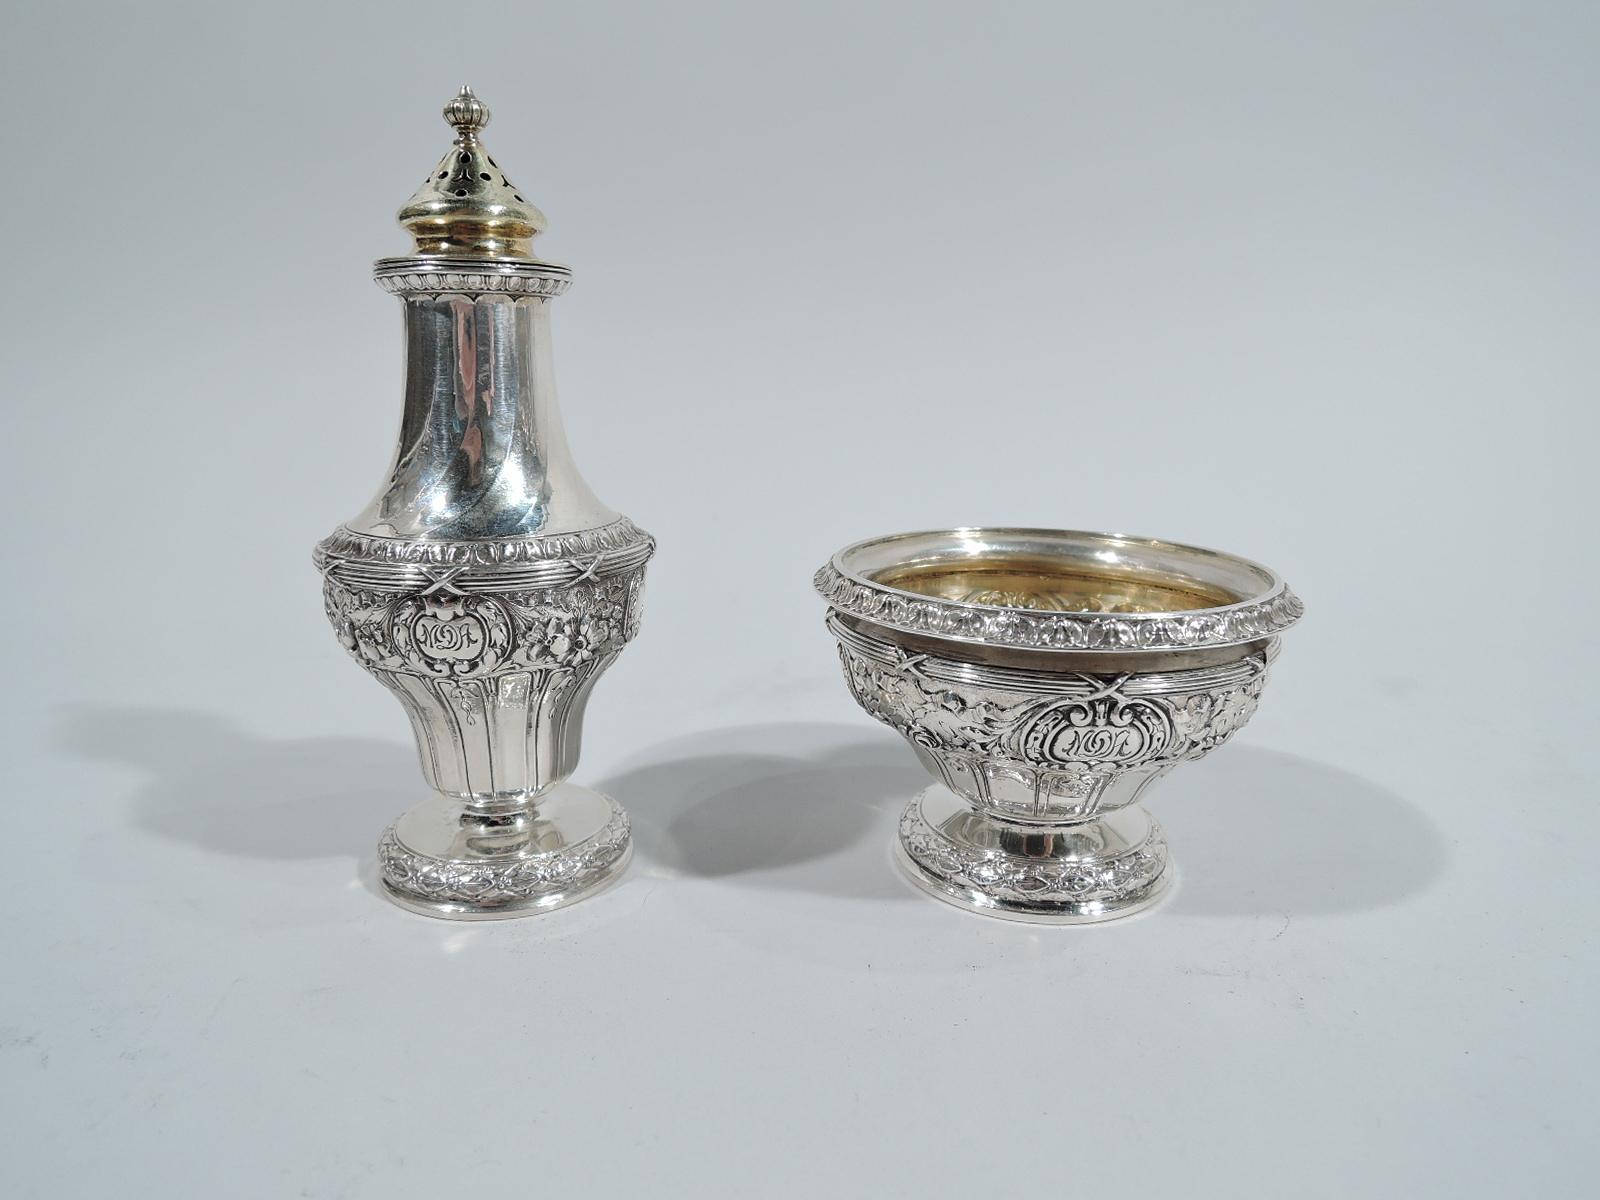 Turn-of-the-century sterling silver open salt and pepper shaker. Made by Gorham in Providence. Salt: Round and tapering bowl with turned-down rim and raised foot. Pepper: Baluster with pierced conical top and raised foot. Neck has subtle twisted